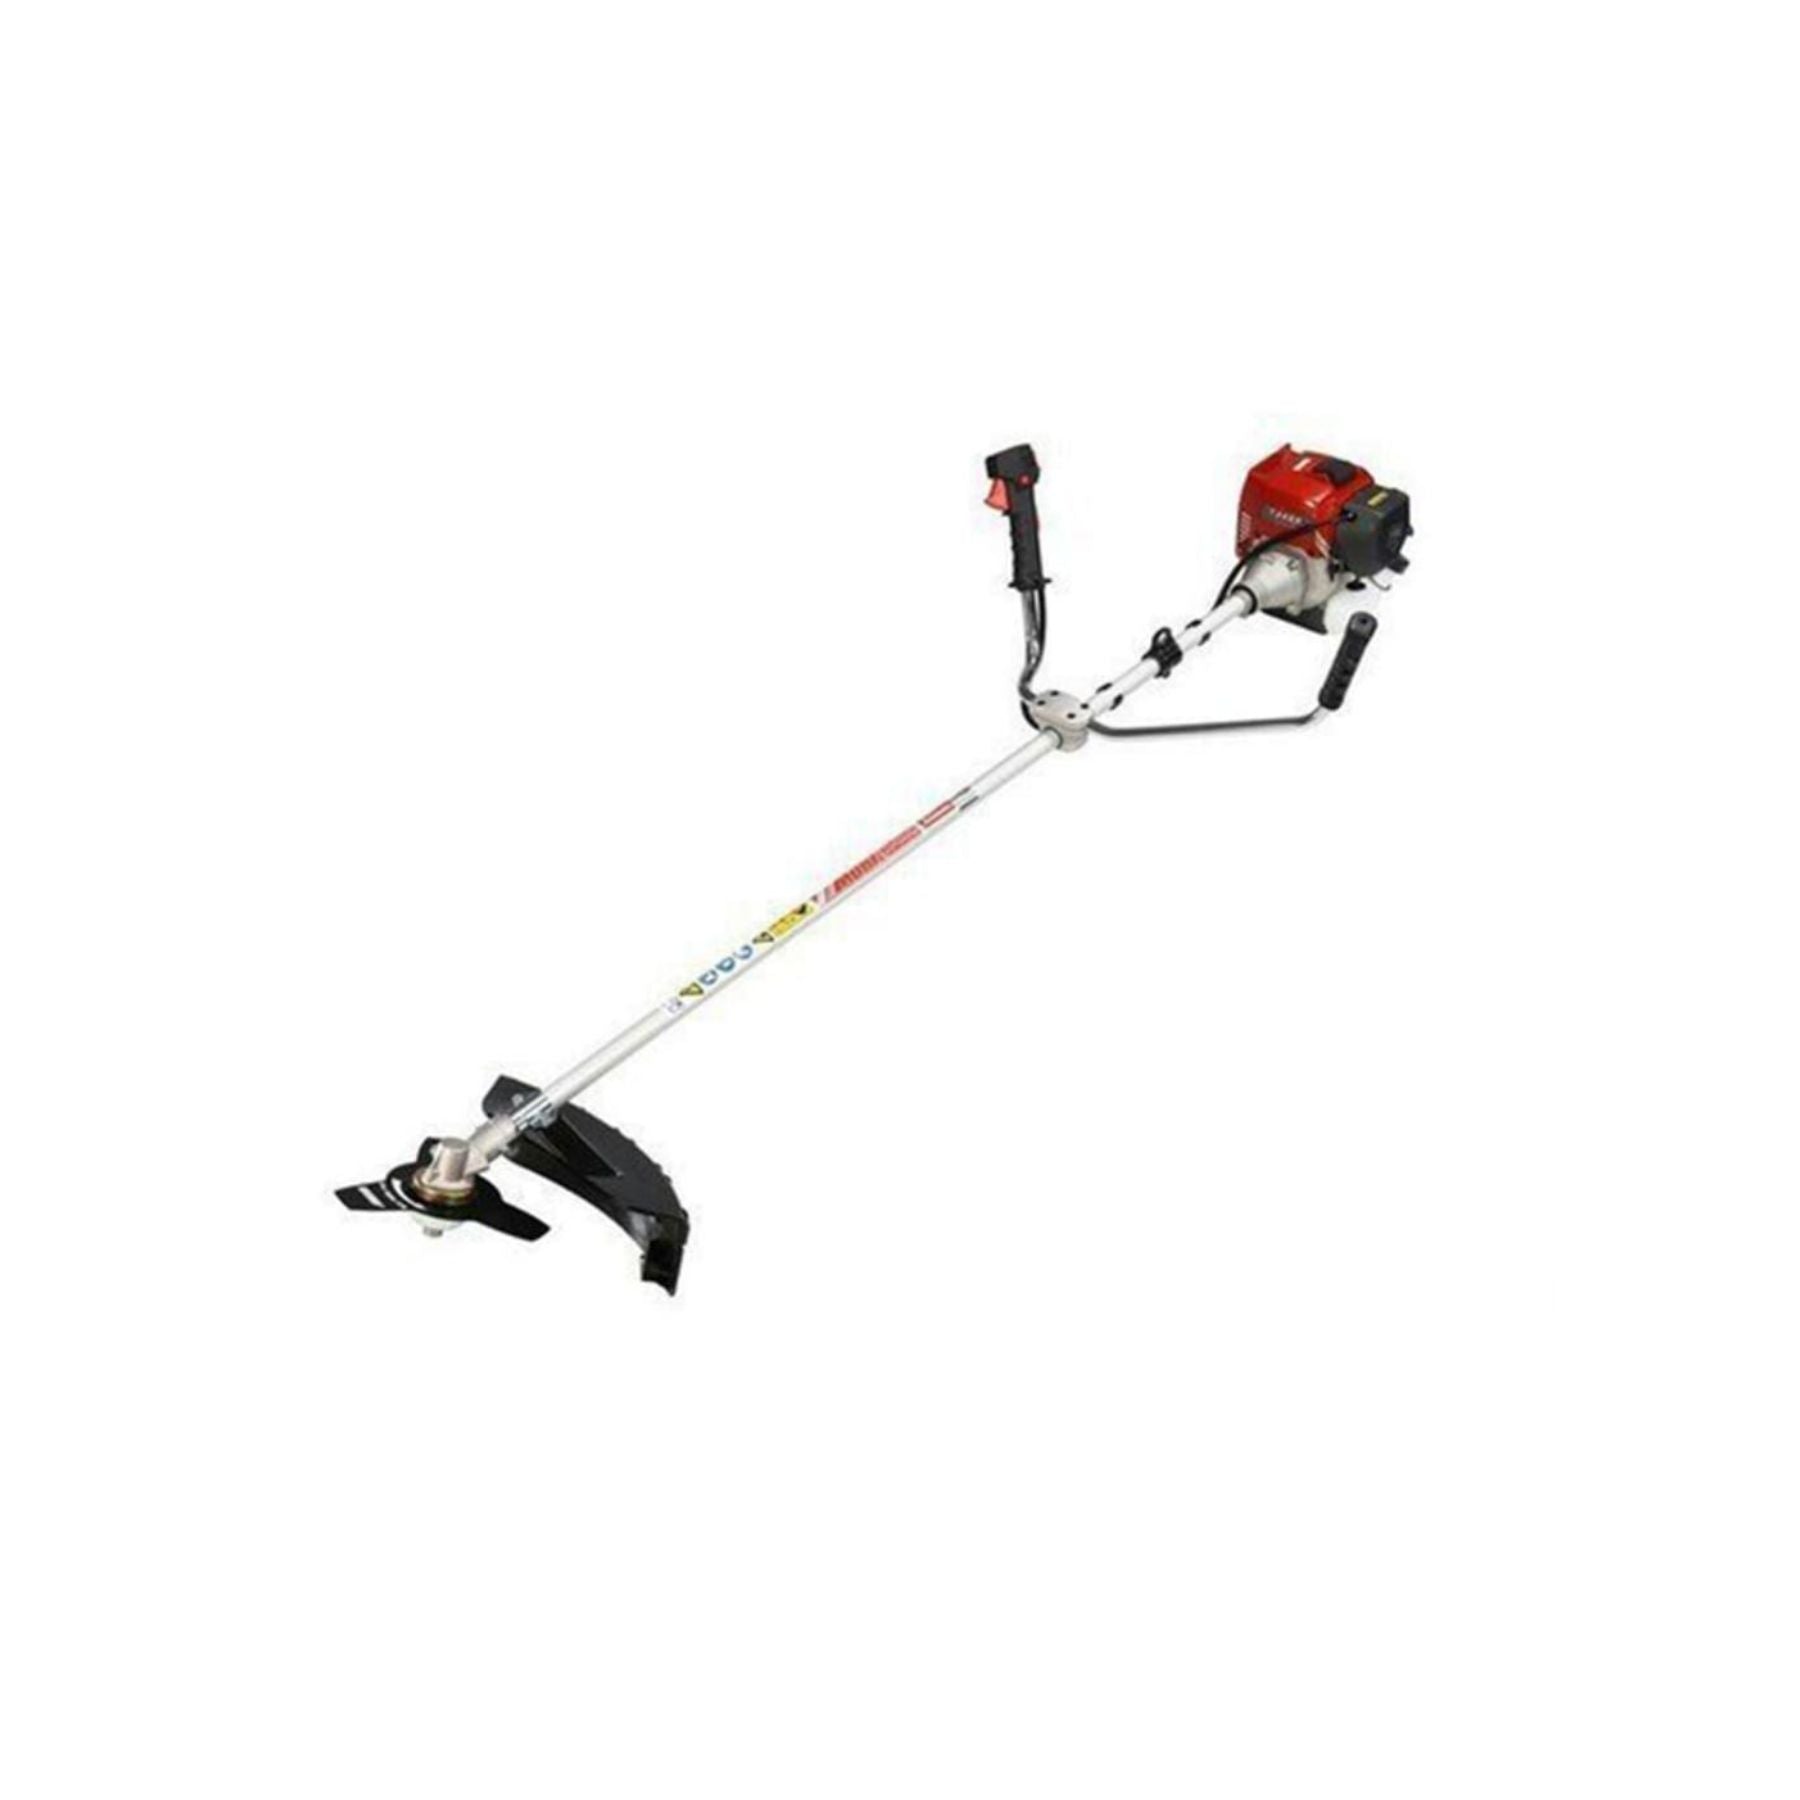 Rover Brush Cutter (Straight Shaft) RS 943